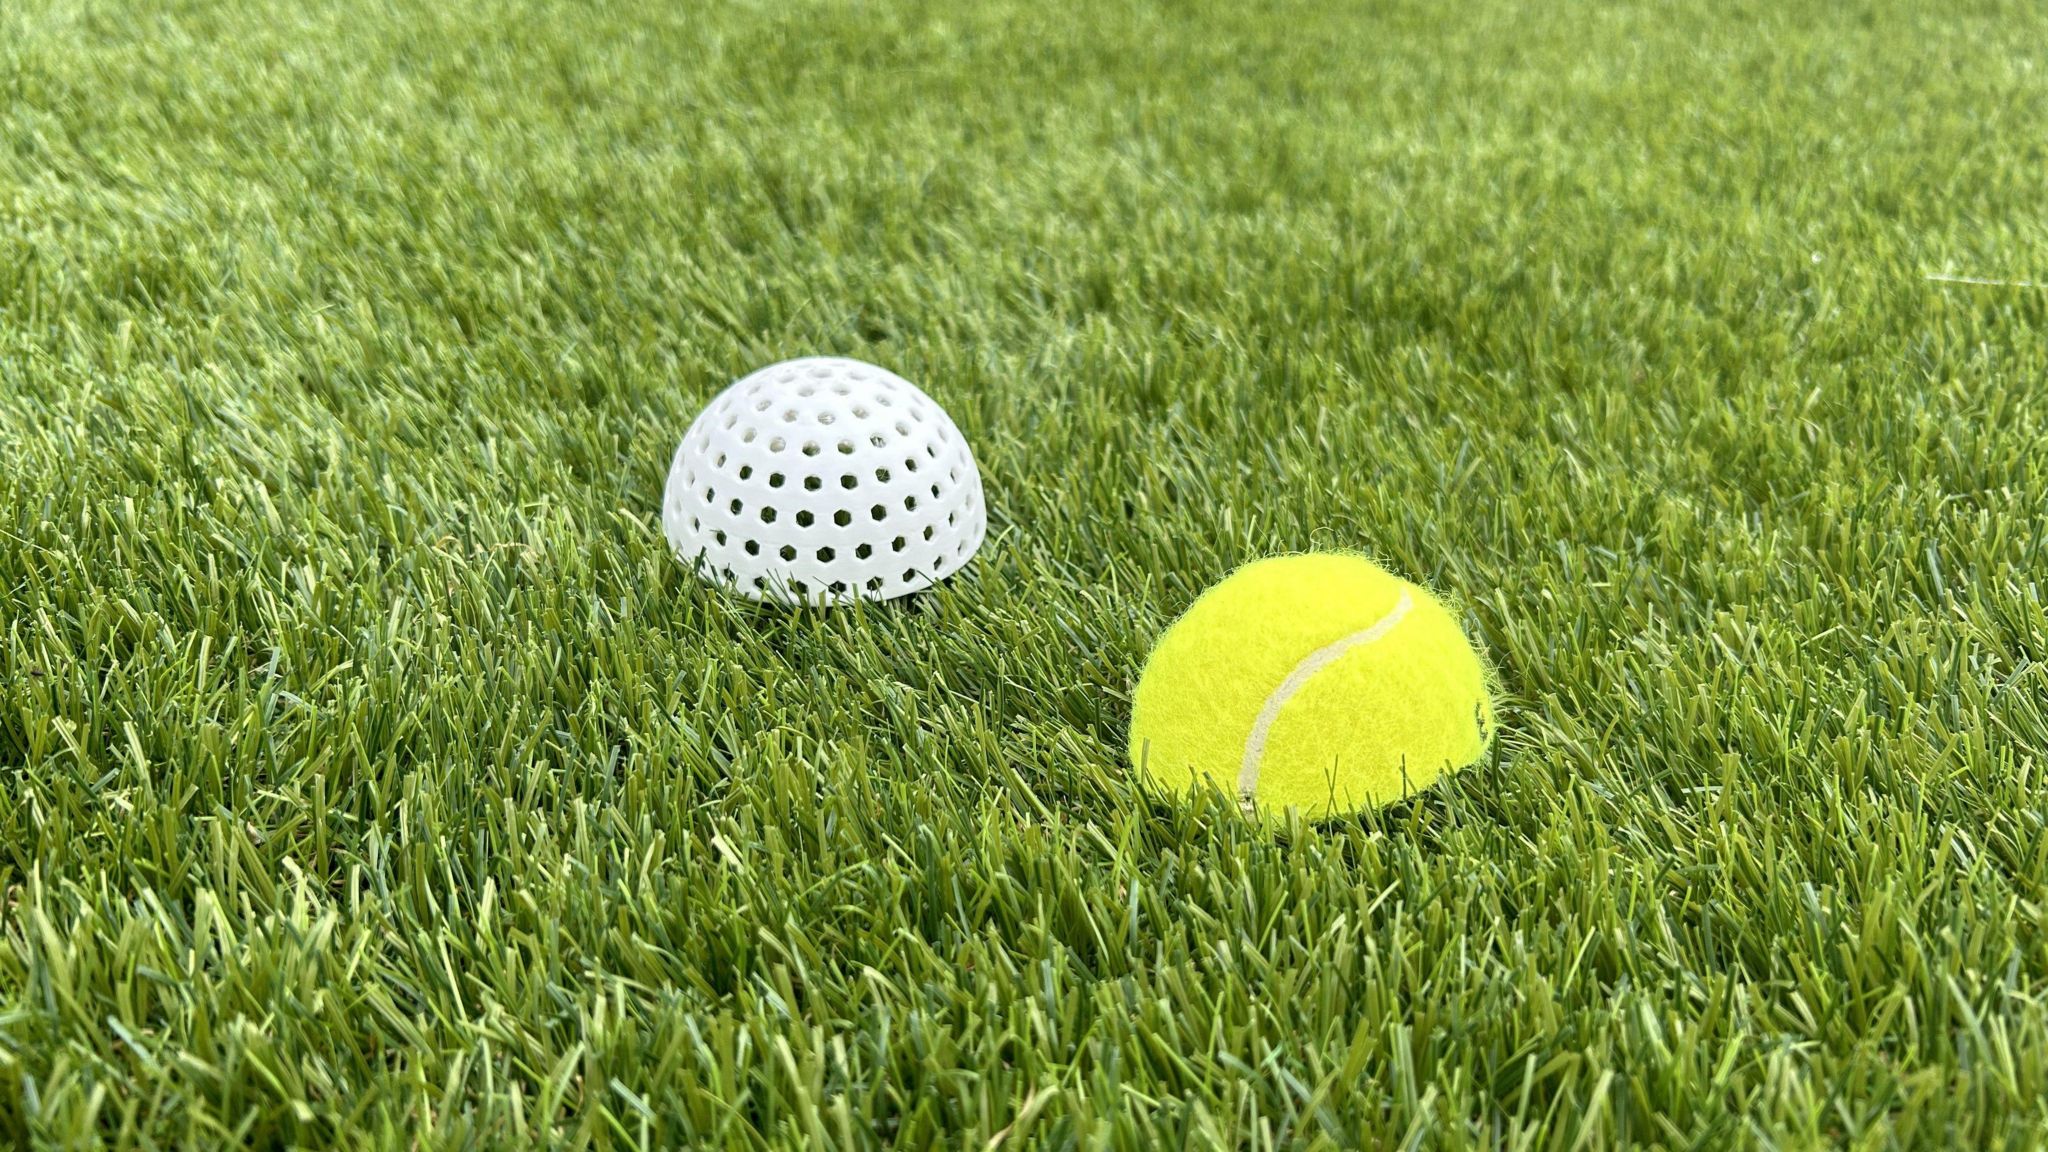 One of the concept balls showing the polymer outer shell with holes compared to a standard tennis ball